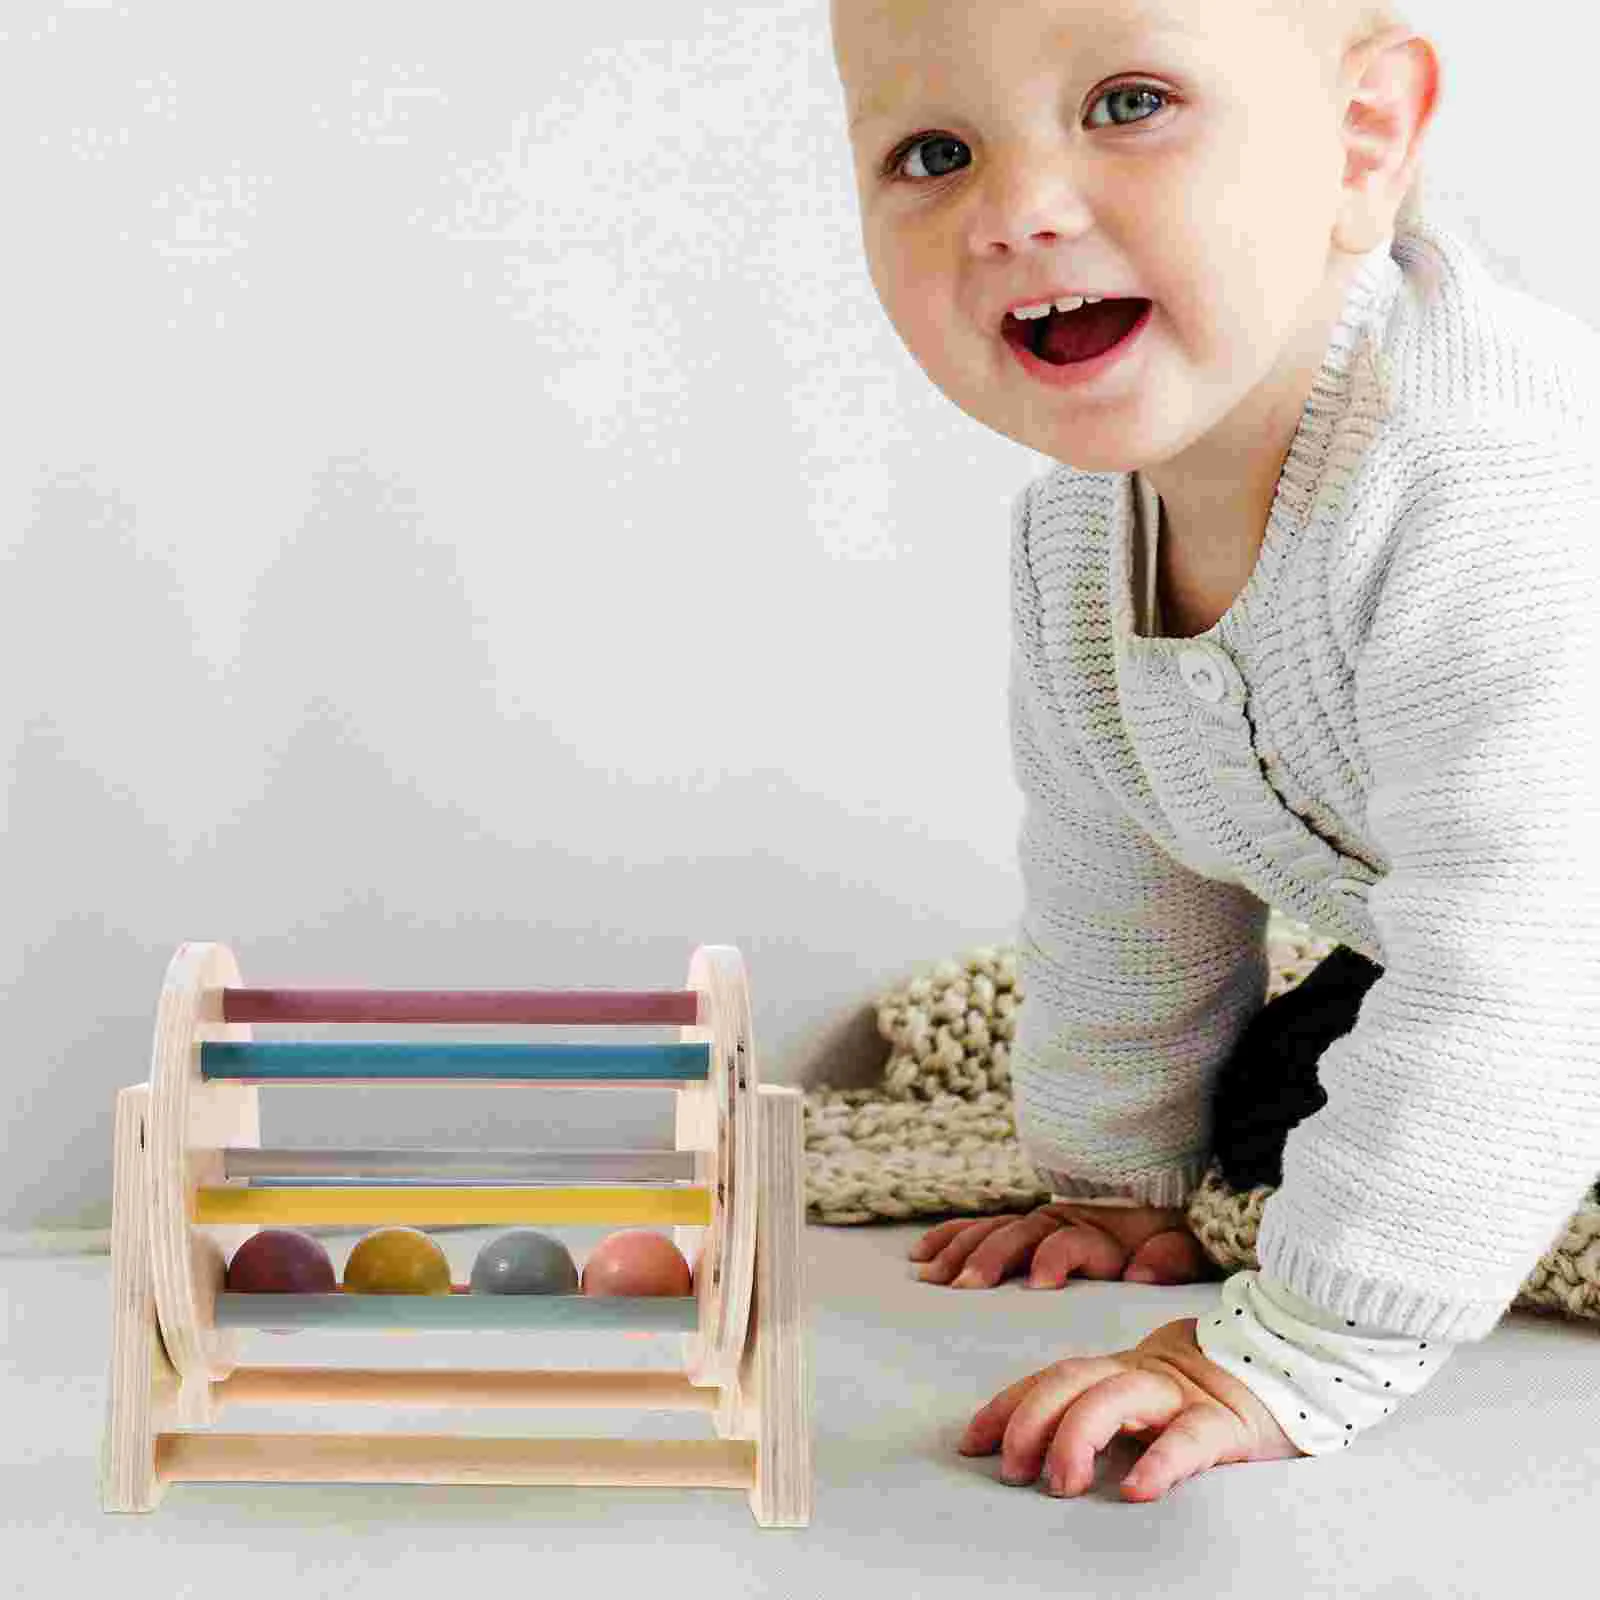 

Toy Teaching Tool Other Educational Toys Textile Drum Cognitive Montessori Kids Sensory Wood Plaything Child